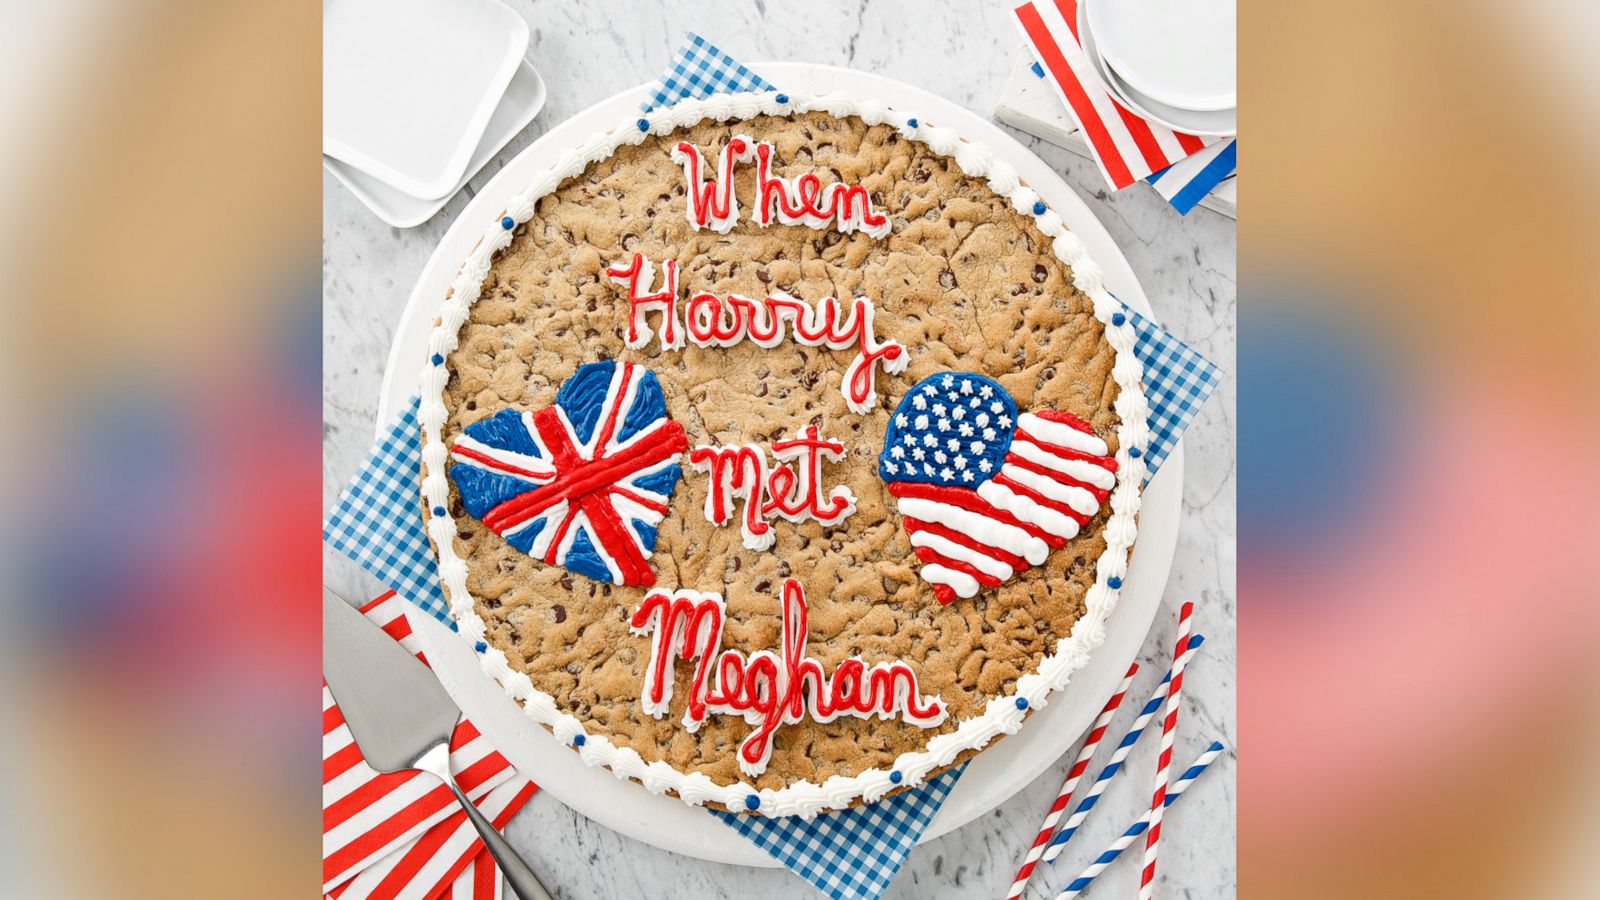 PHOTO: Mrs. Fields dressed up the chocolate chip cookie cake for the royal wedding.